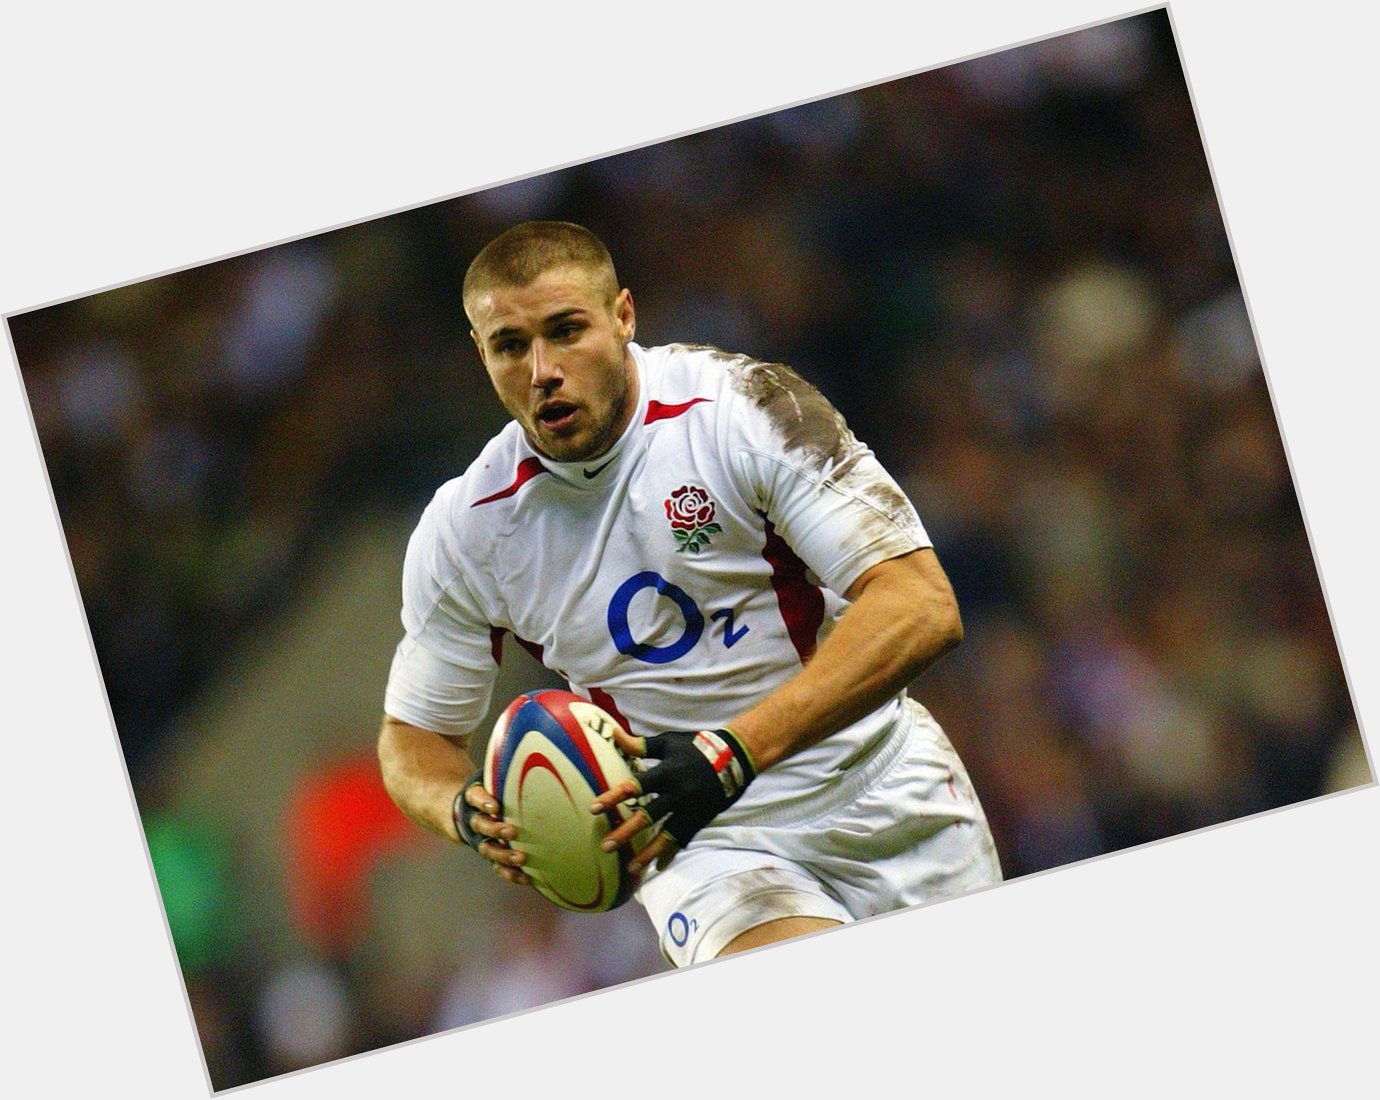 Happy Birthday Ben Cohen!

Cohen is the 10th-highest point scorer in England rugby history. 